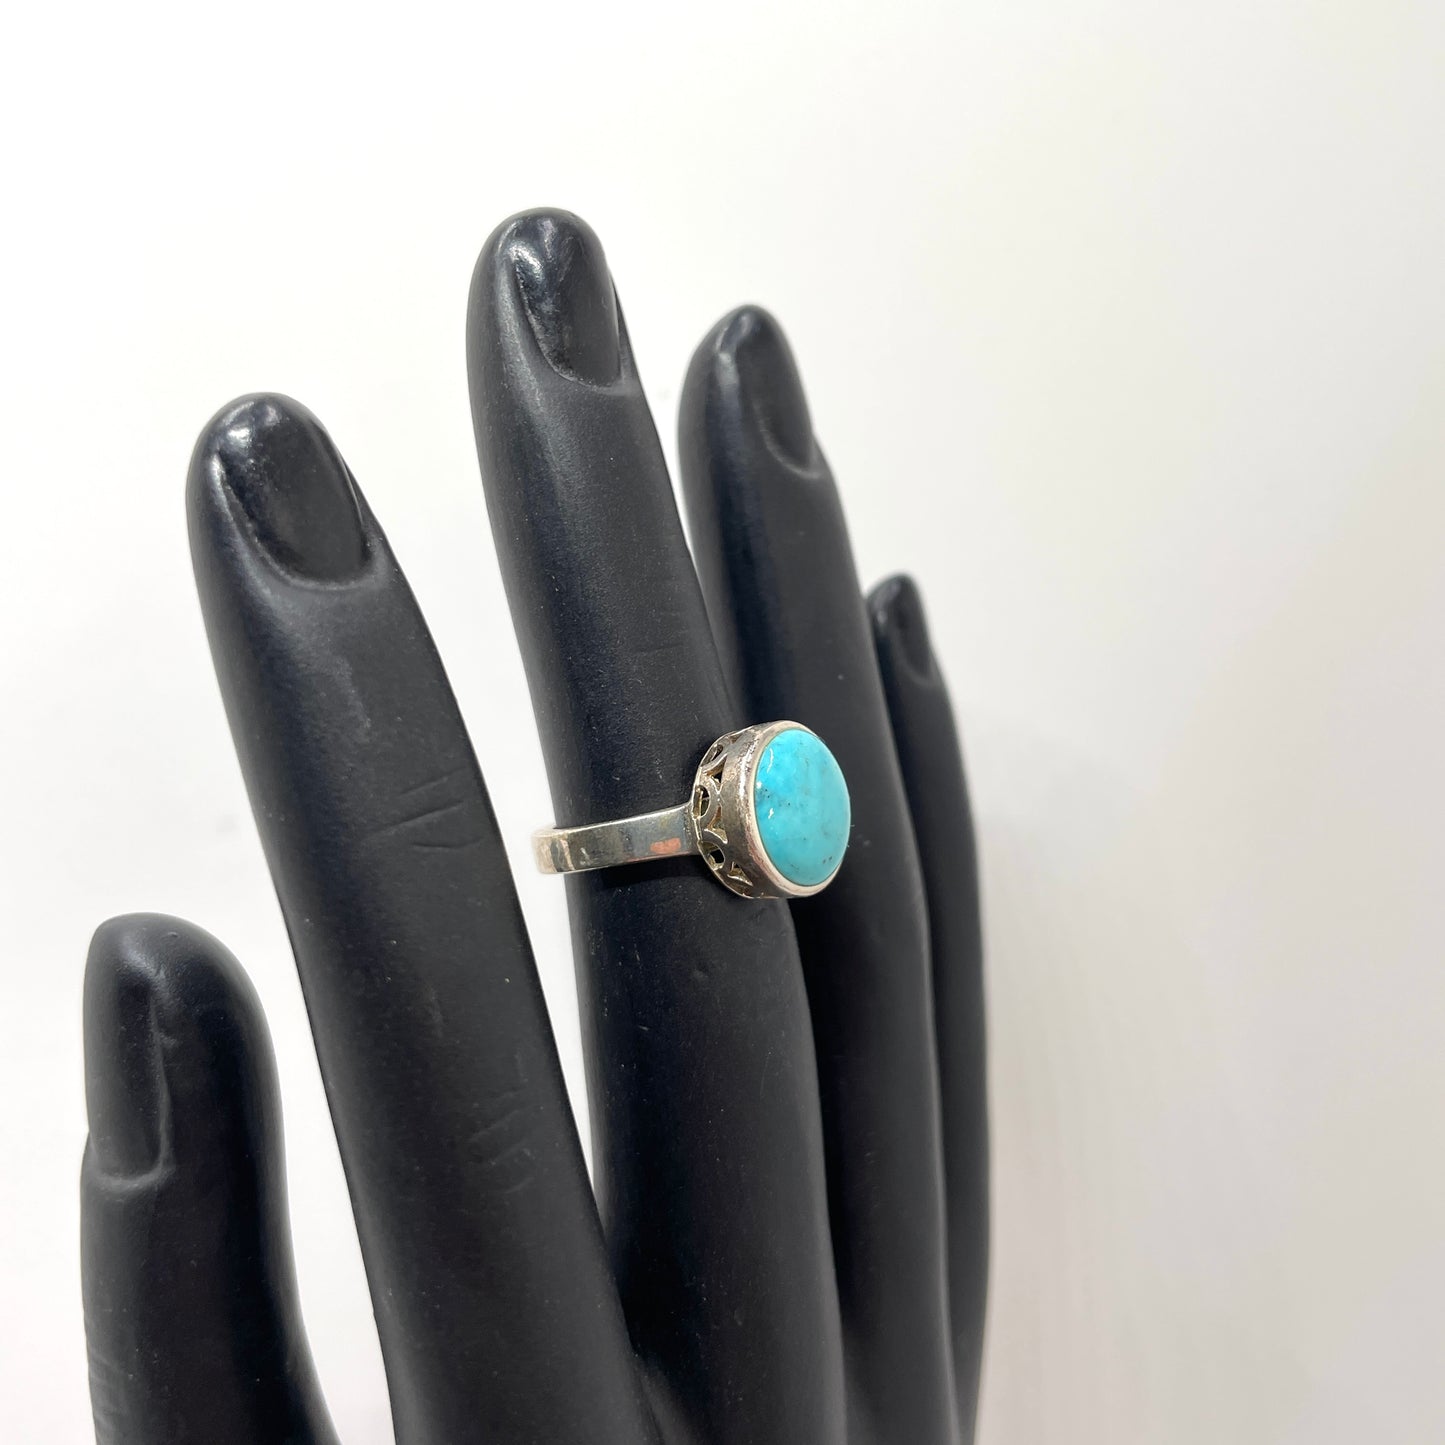 Vintage Sterling Silver & Turquoise Ring - Size 5